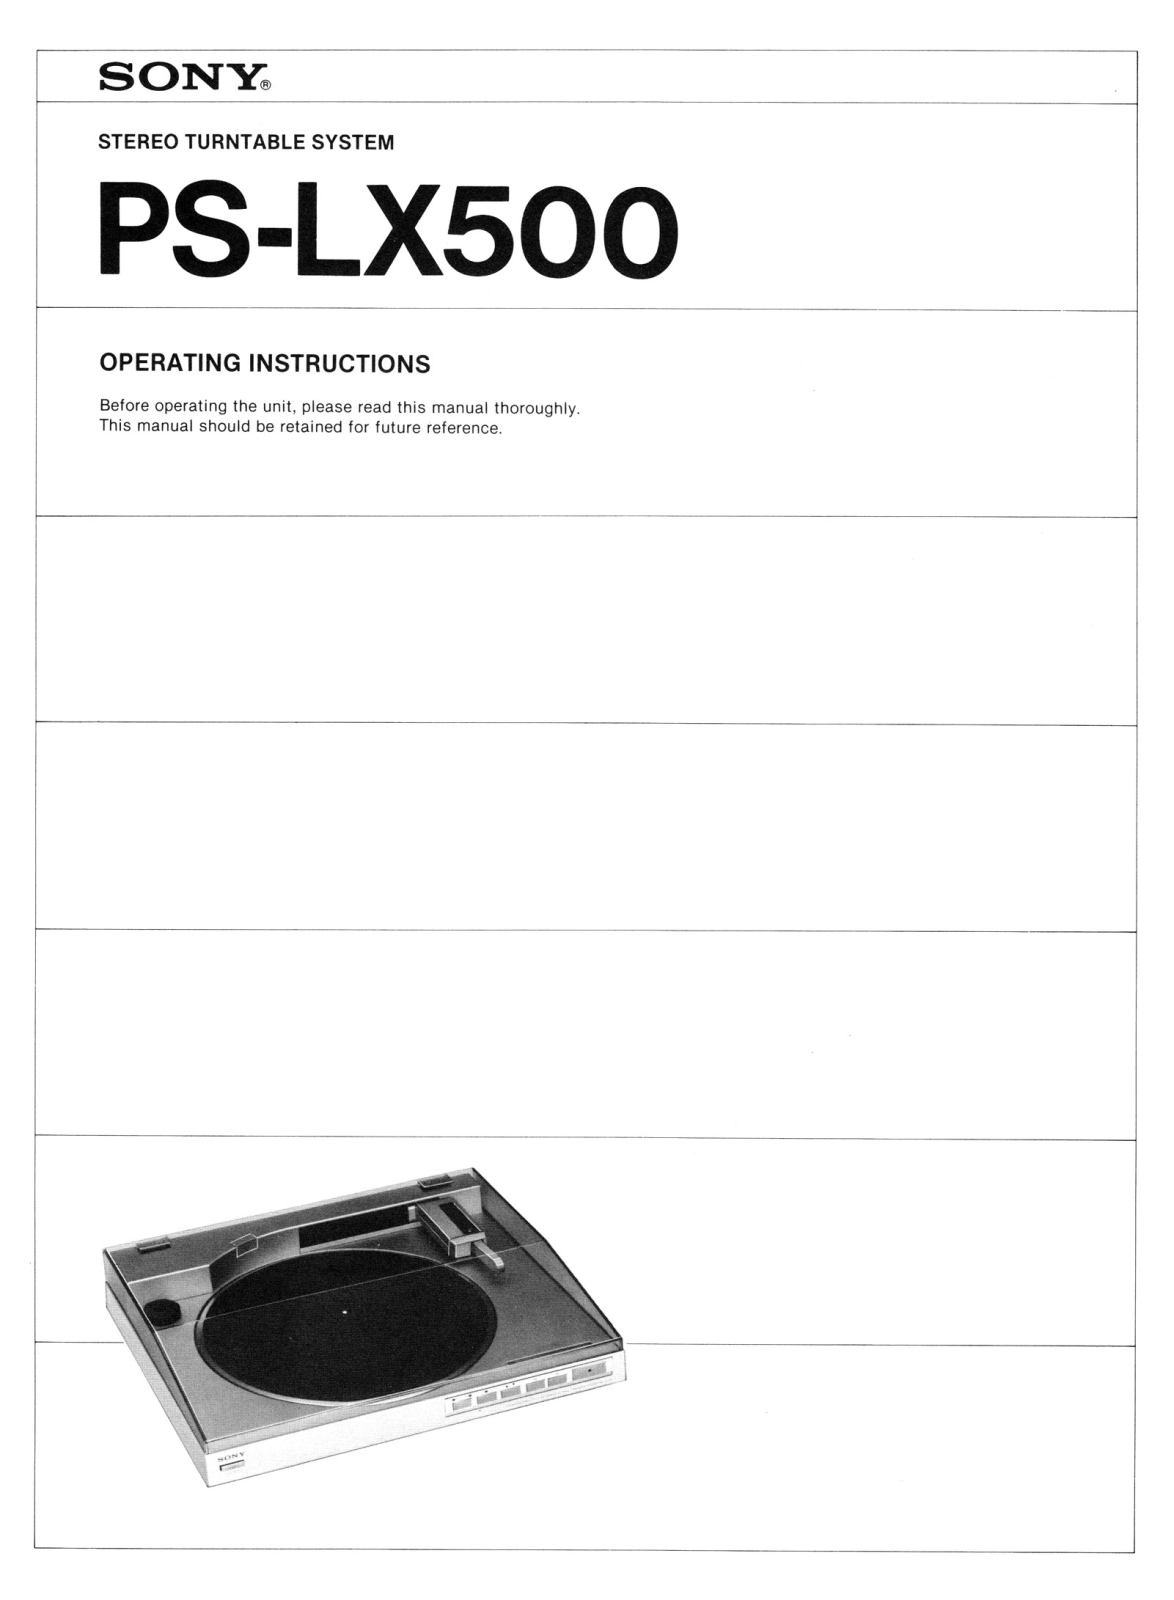 Sony PS-LX500 Owners Manual